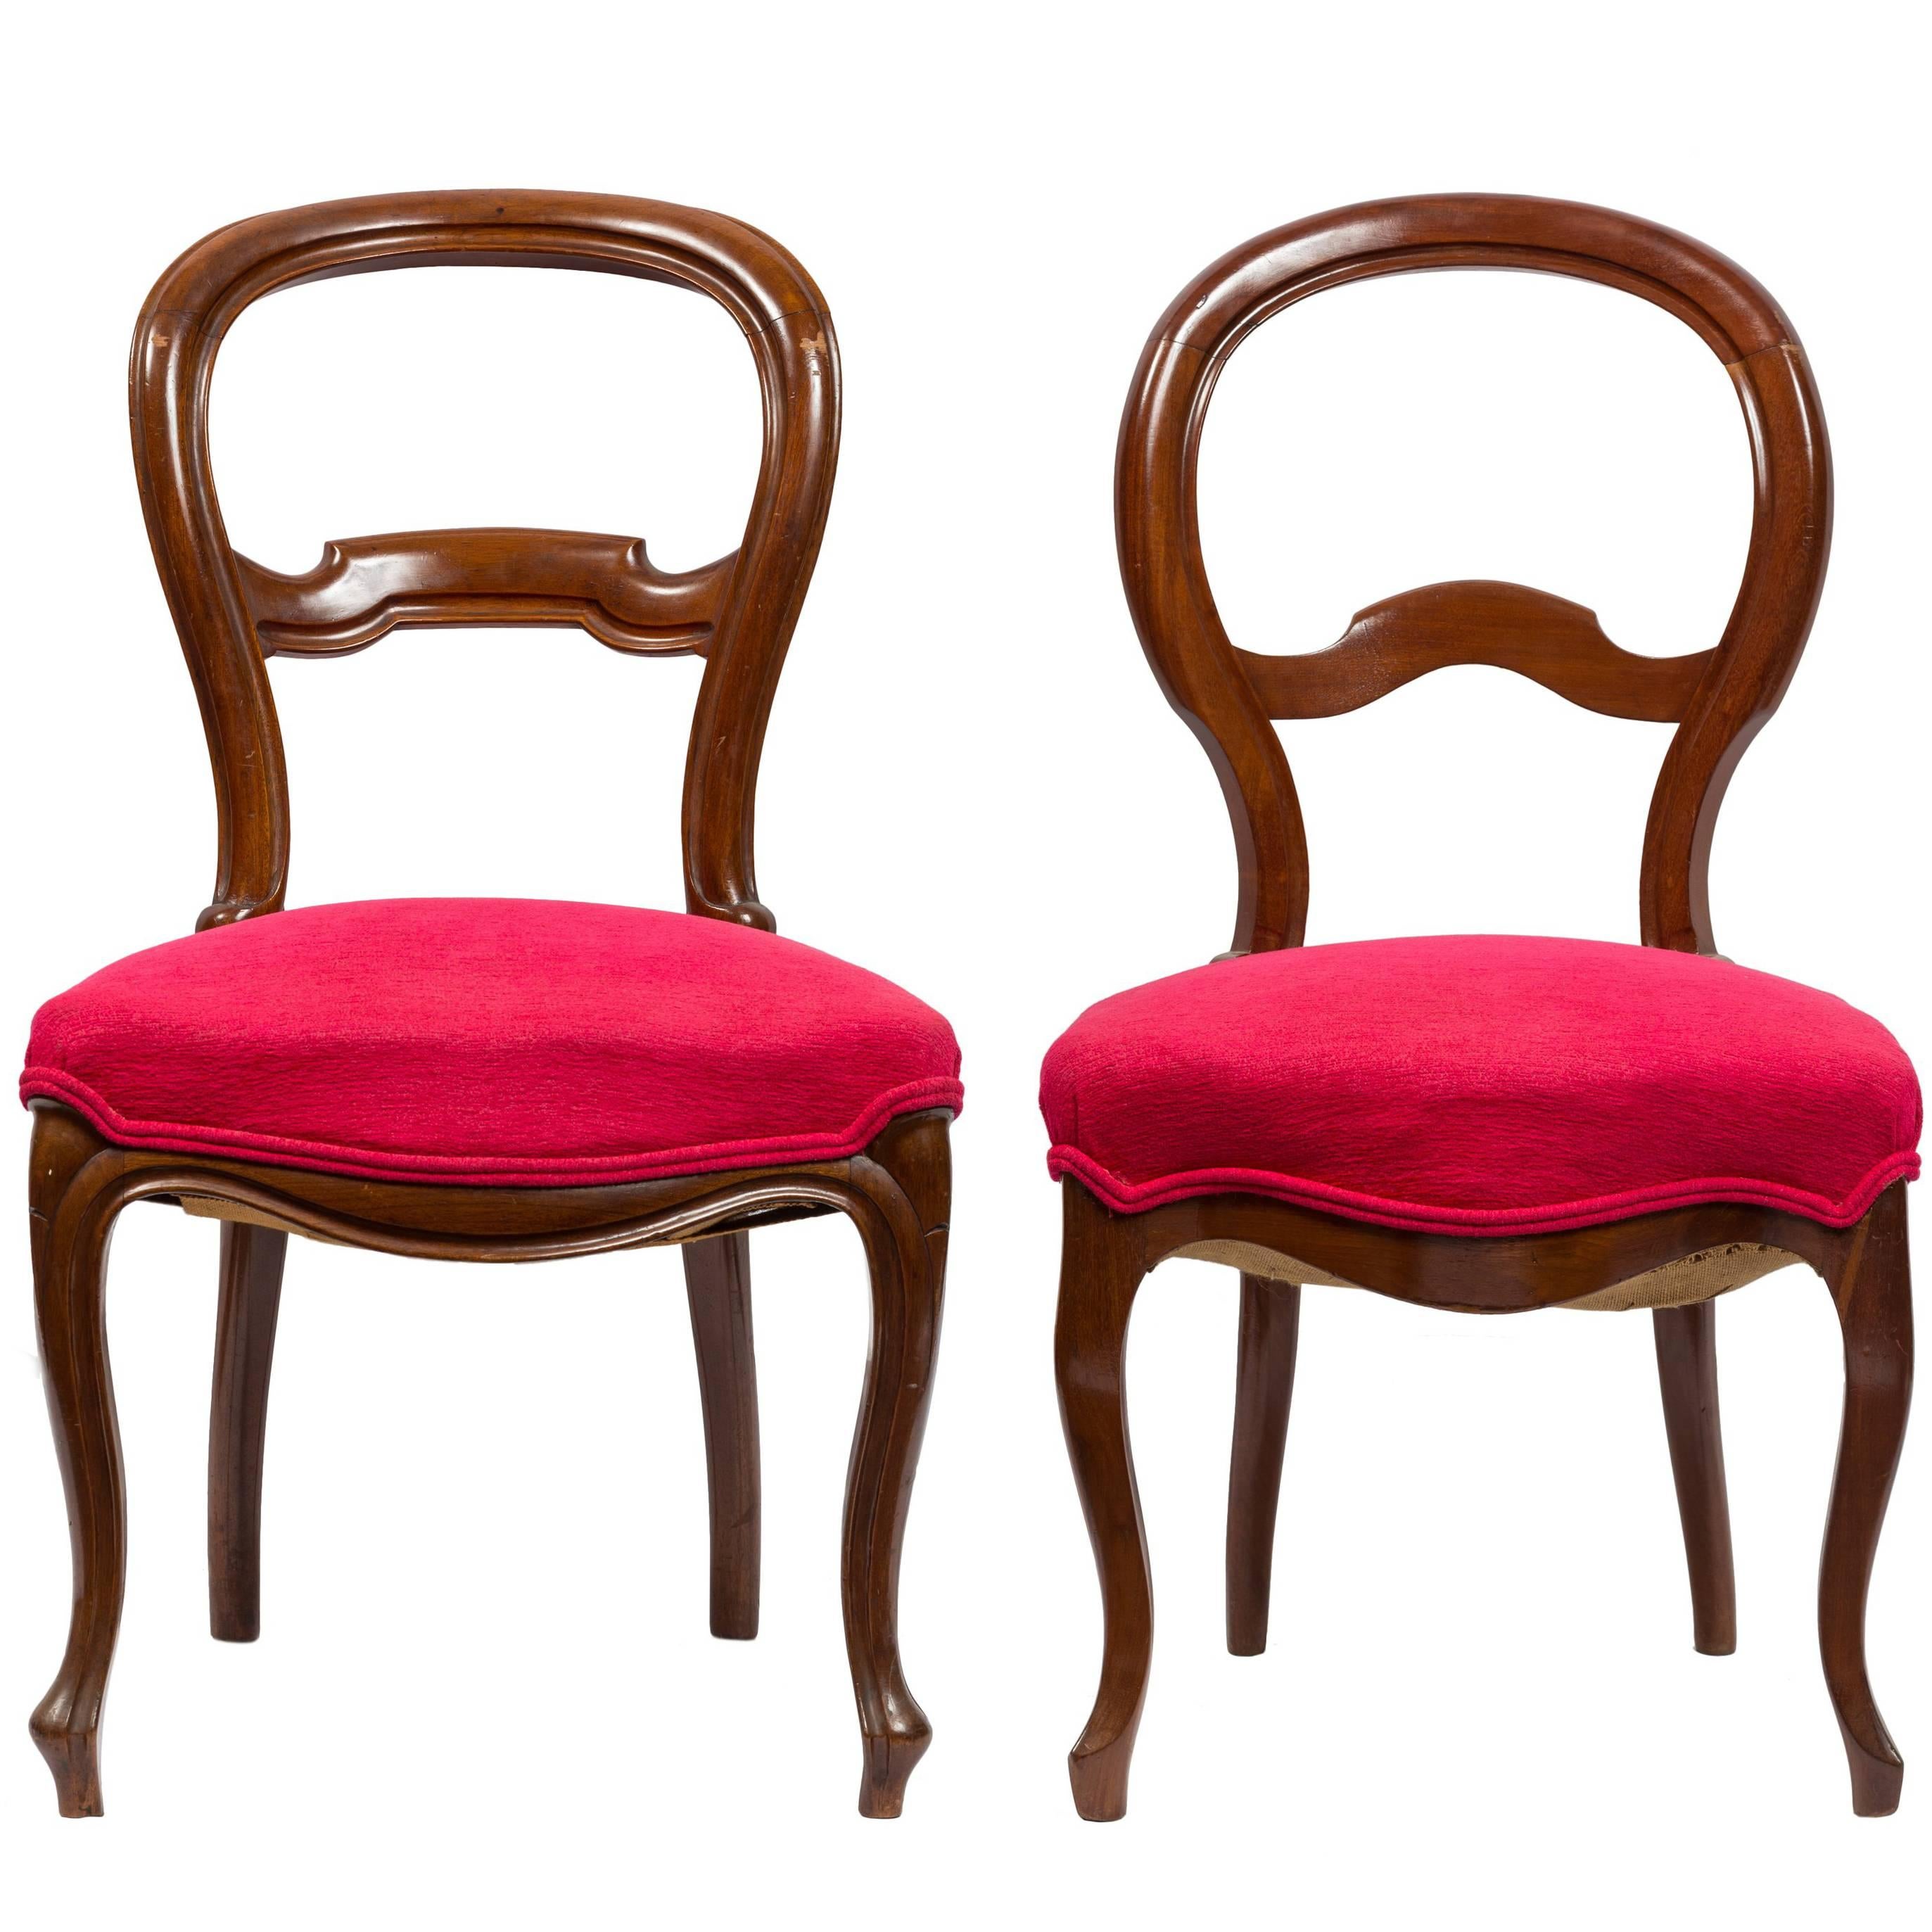 Unmatched Pair of Walnut Spanish Isabelinas Chairs, New Red Upholstery